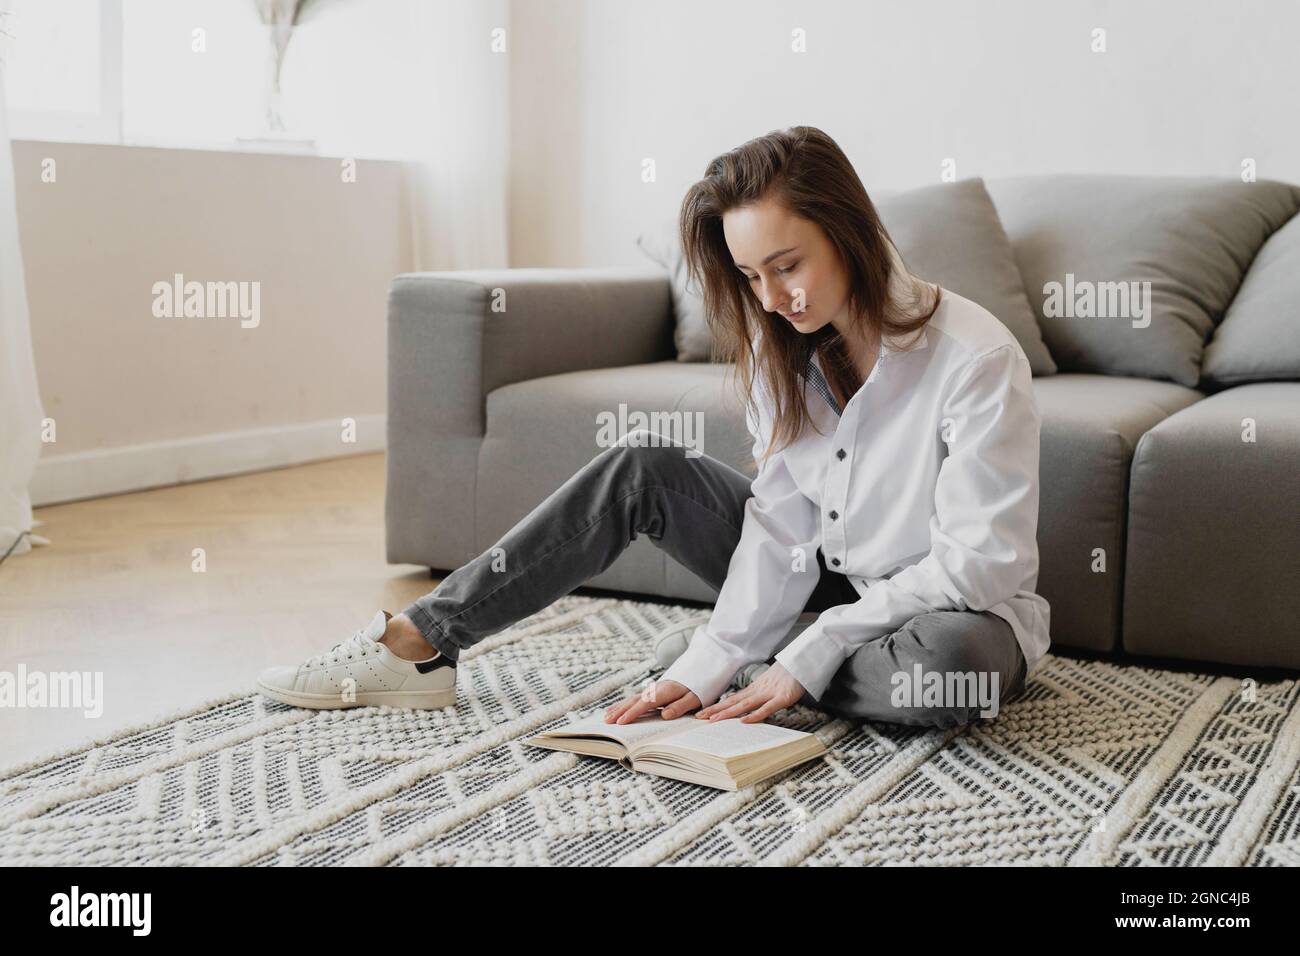 Young woman sitting on the floor at home and reading book. Stock Photo